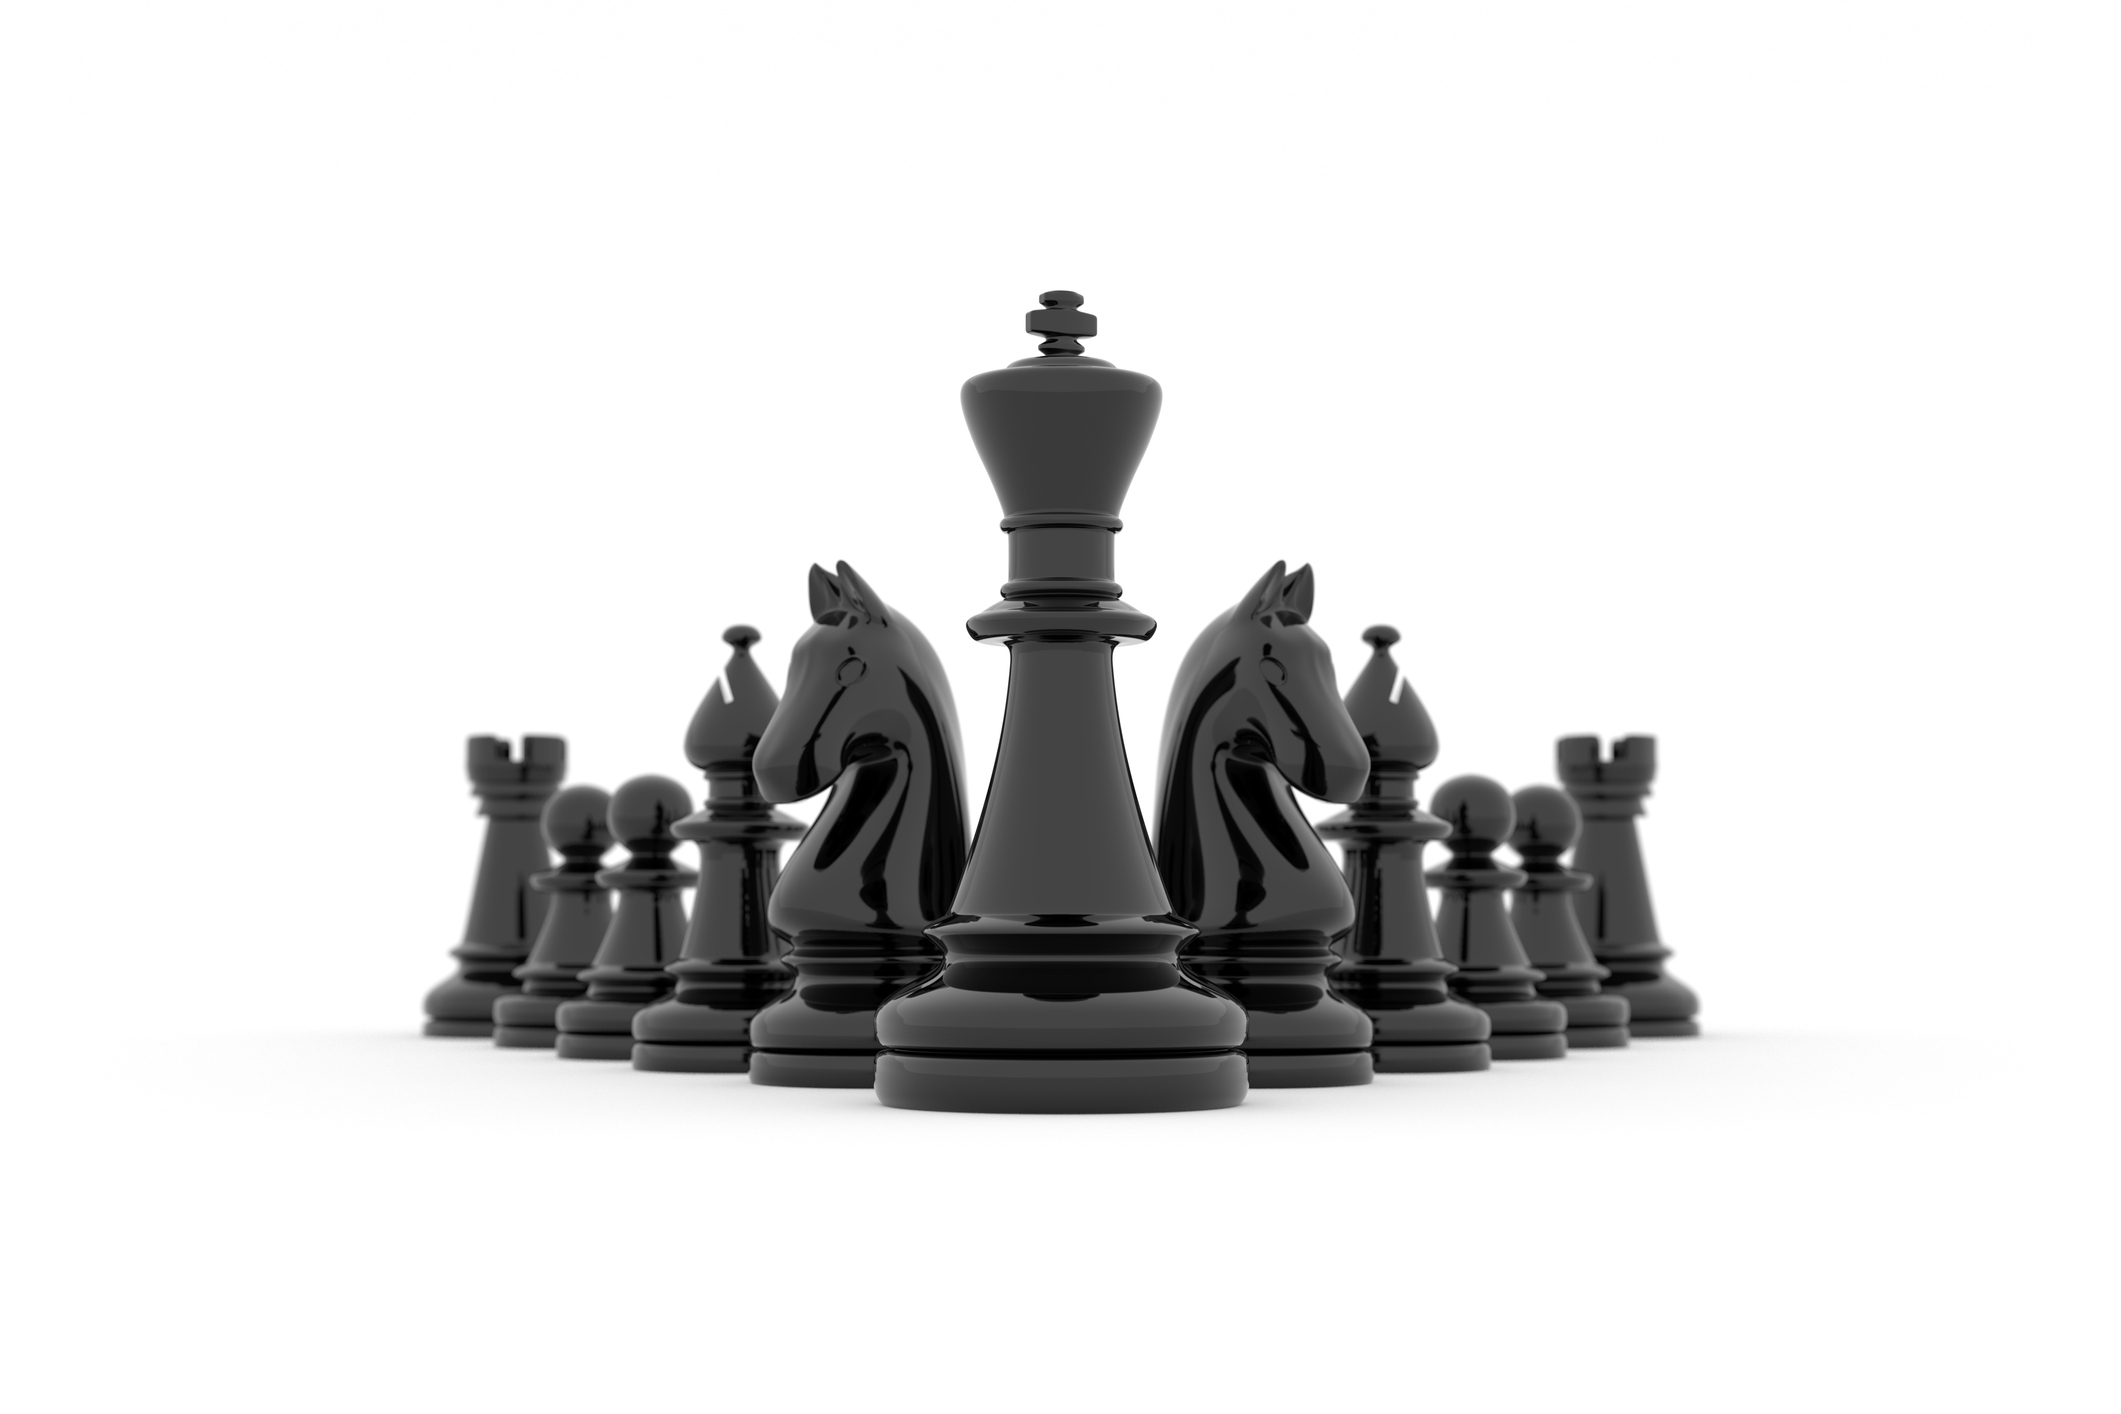 Glossy black chess pieces against a white background